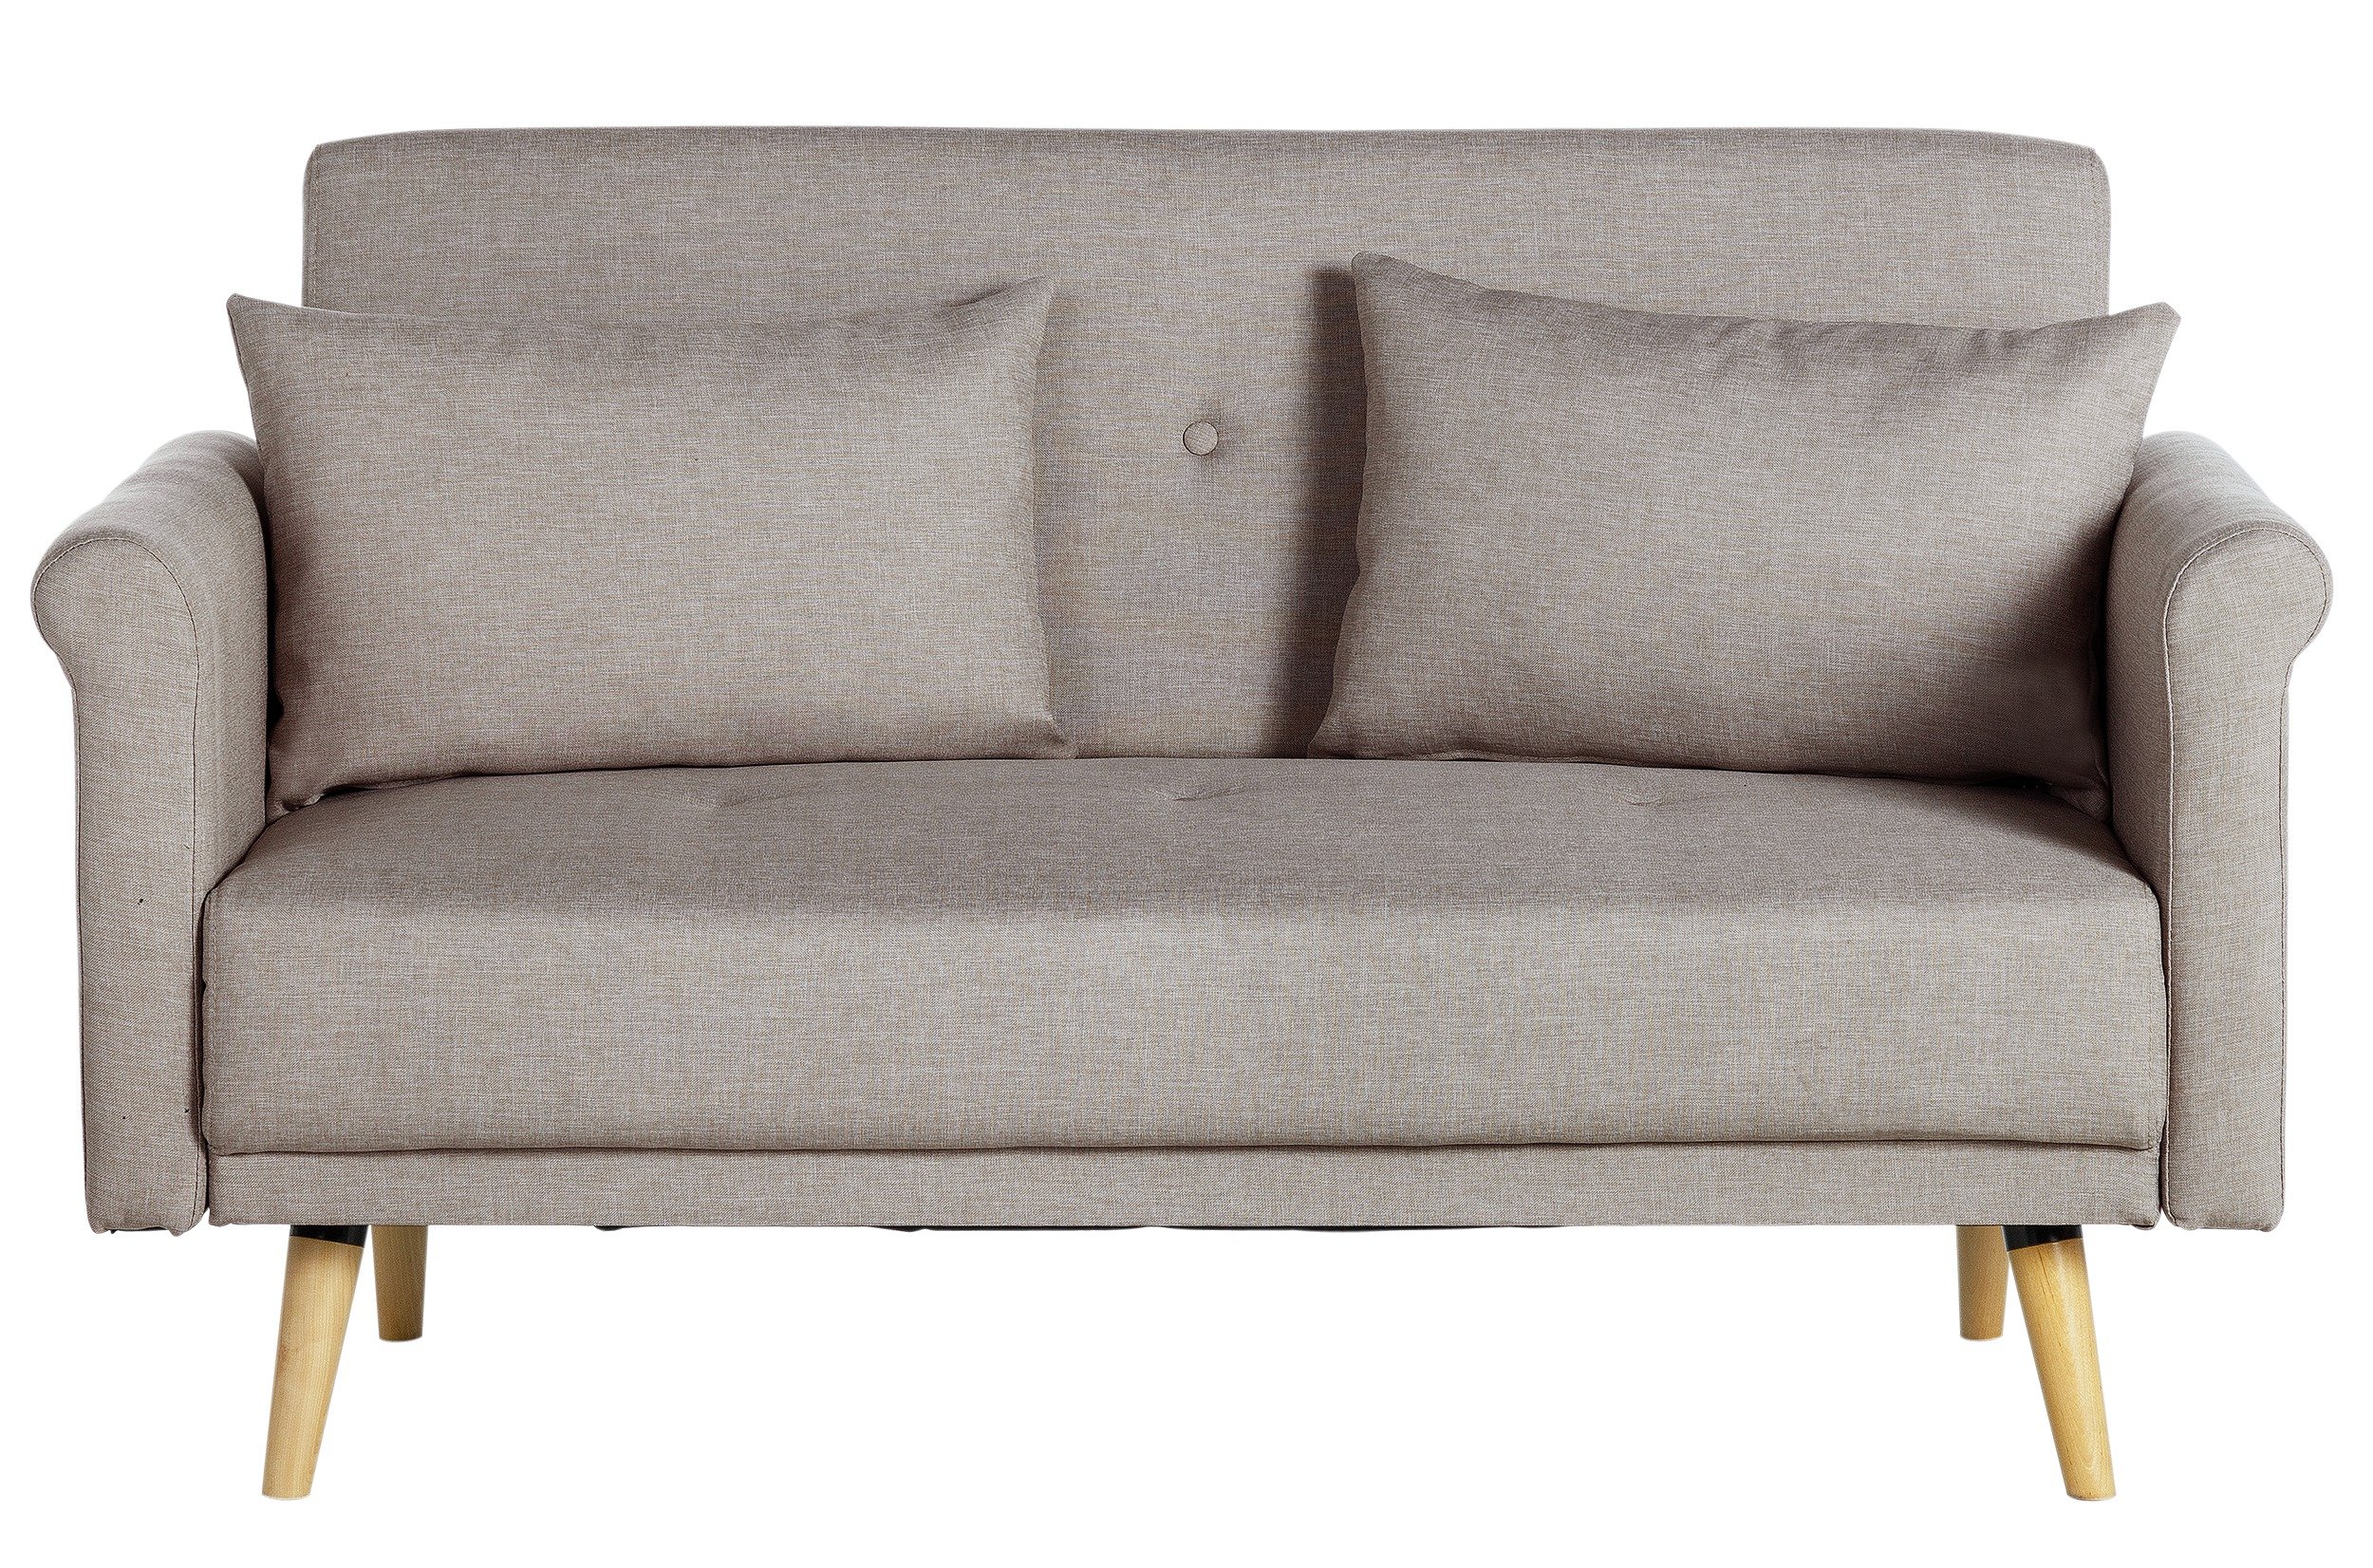 Buy Hygena Evie 2 Seater Fabric Sofa in a Box - Natural ...